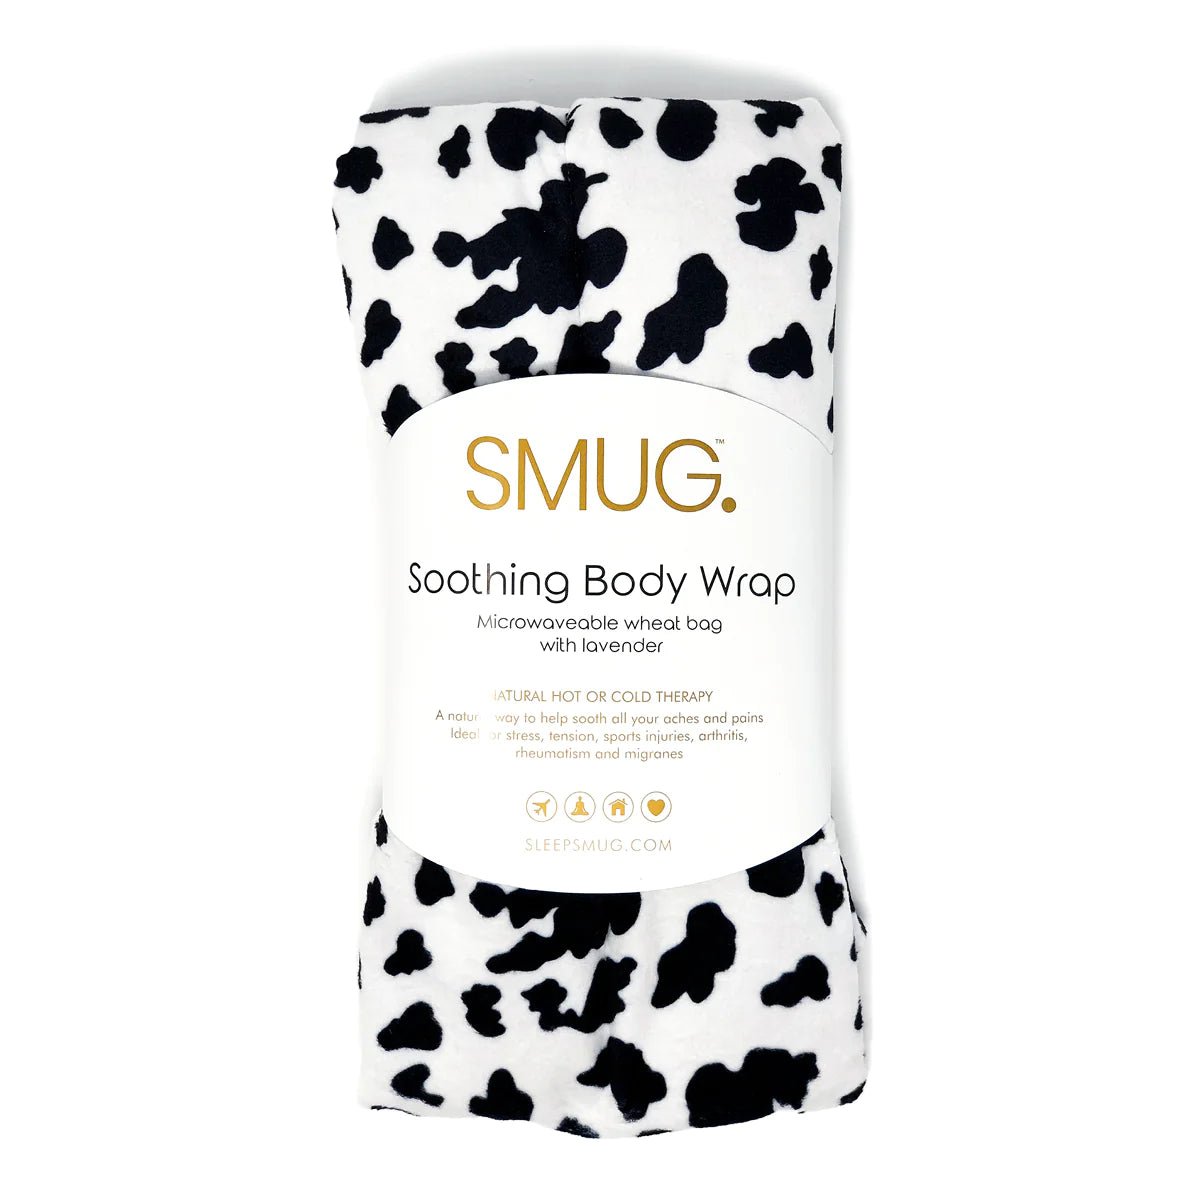 Smug Soothing Body Wrap Wheat Bag Infused with Lavender Oil - Women's Accessories - British D'sire